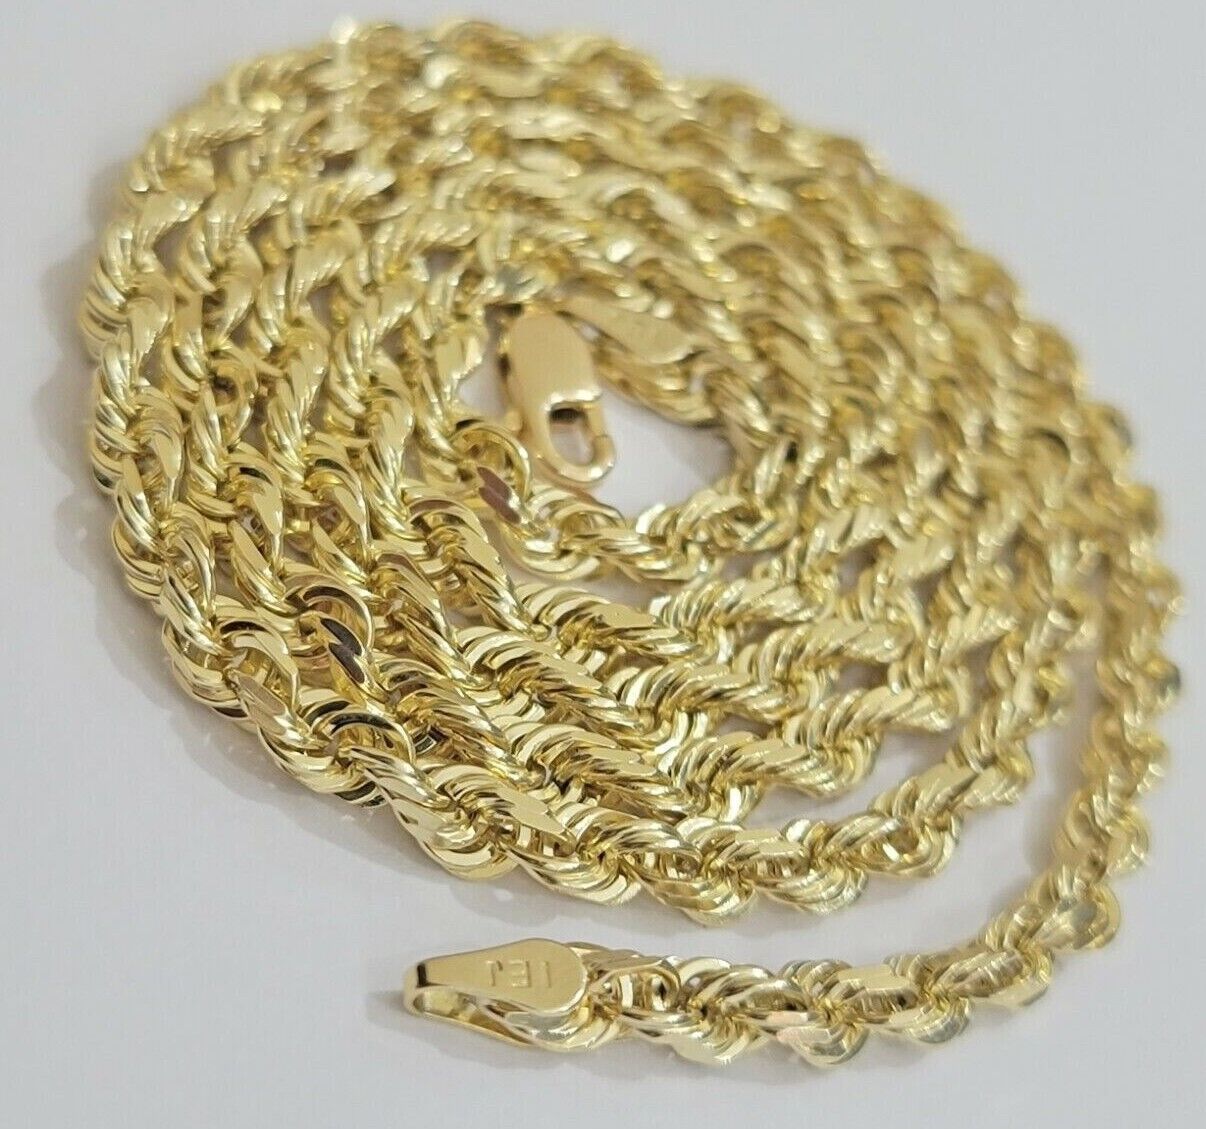 Real 10k Yellow Gold Rope Chain necklace 18 inch - 28 inch SOLID 4mm Mens Women